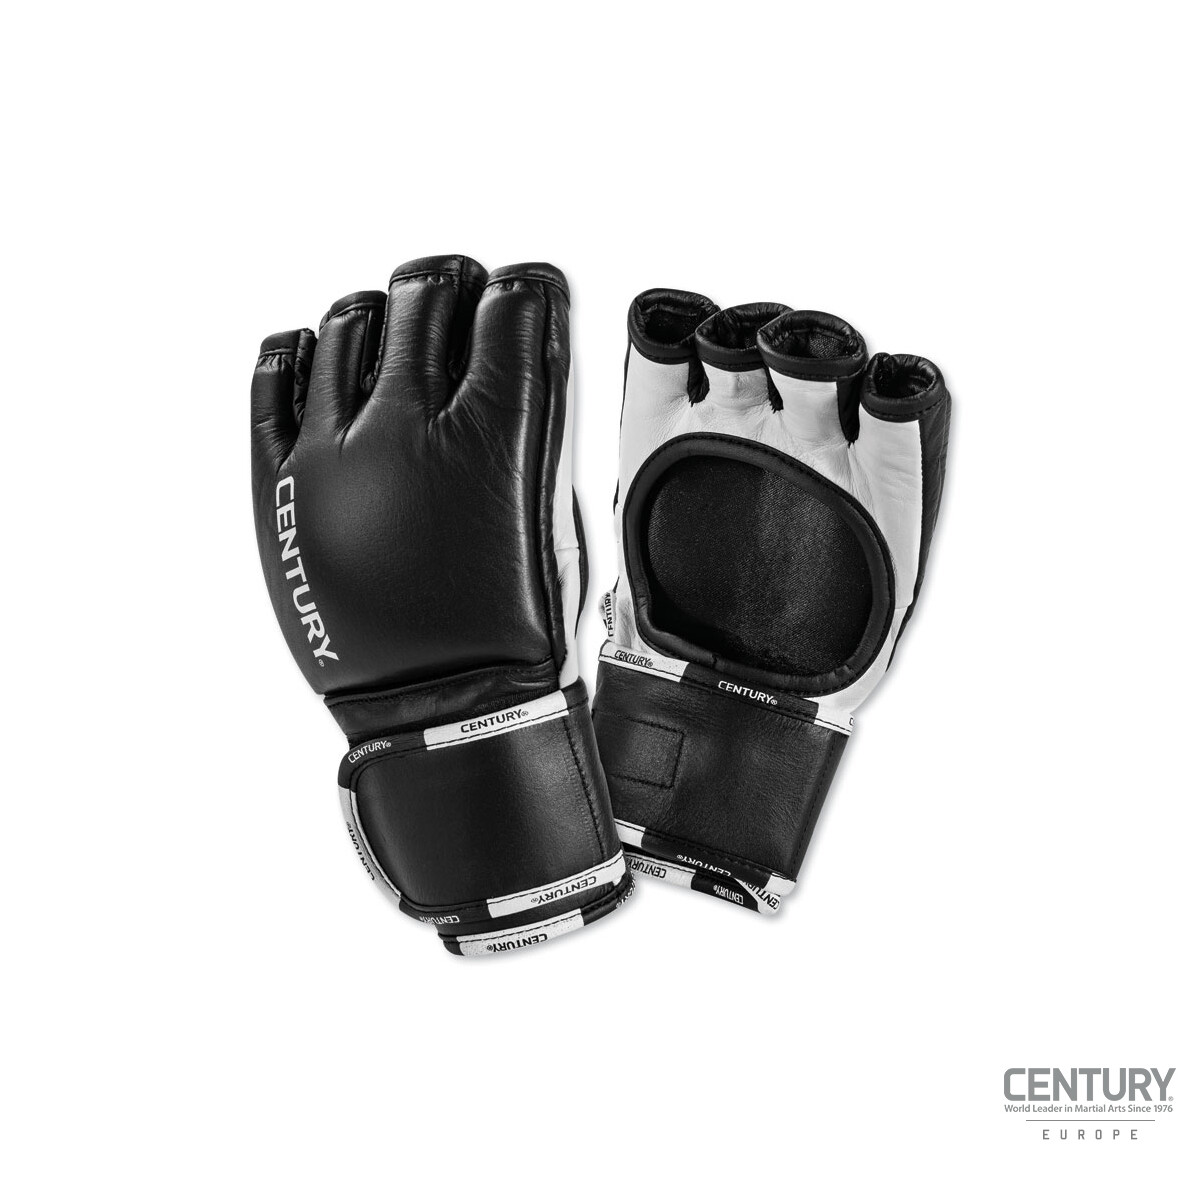 Century "Creed" MMA Competition Gloves XL